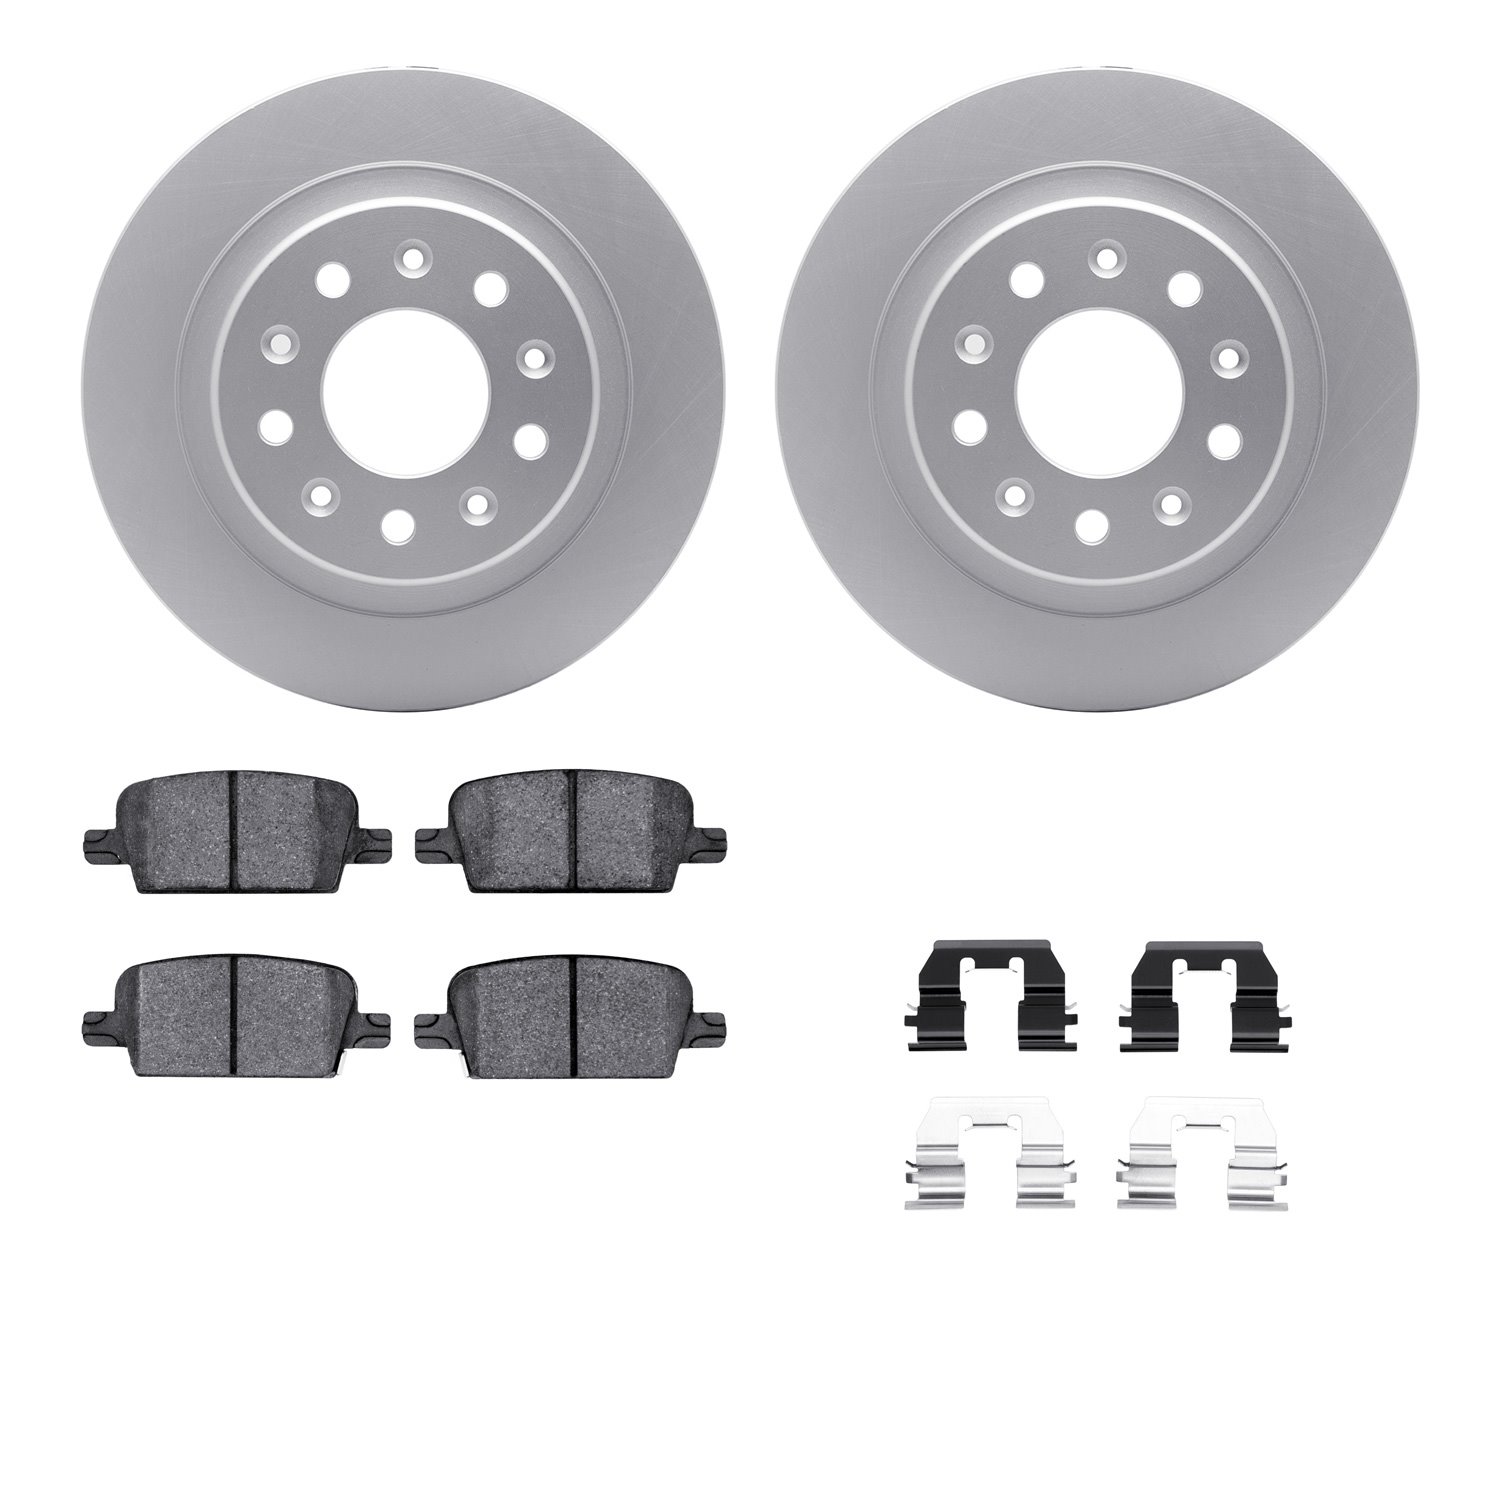 4312-47050 Geospec Brake Rotors with 3000-Series Ceramic Brake Pads & Hardware, Fits Select GM, Position: Rear